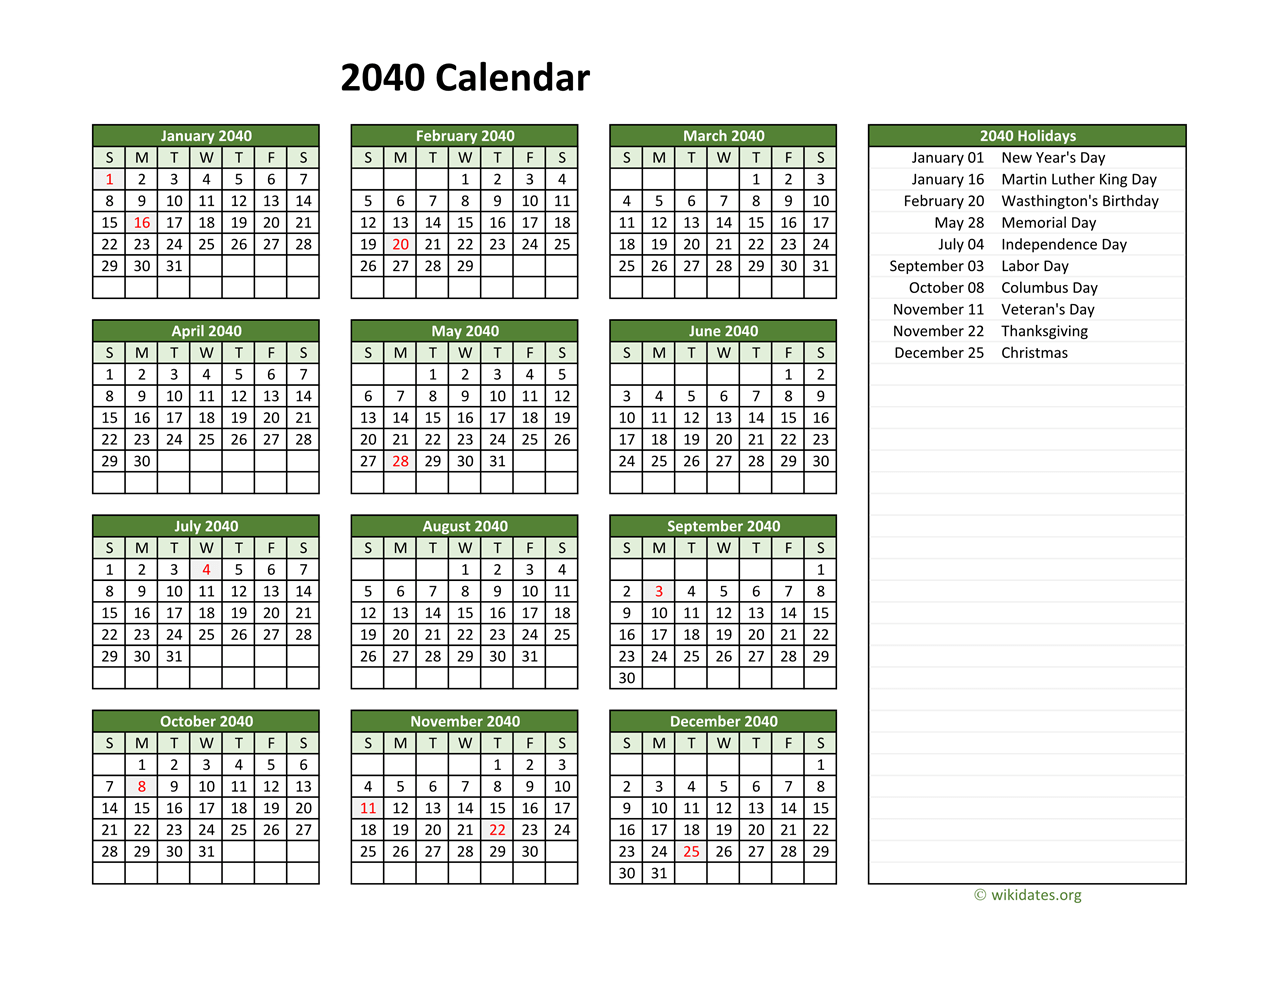 Printable 2040 Calendar with Federal Holidays | WikiDates.org